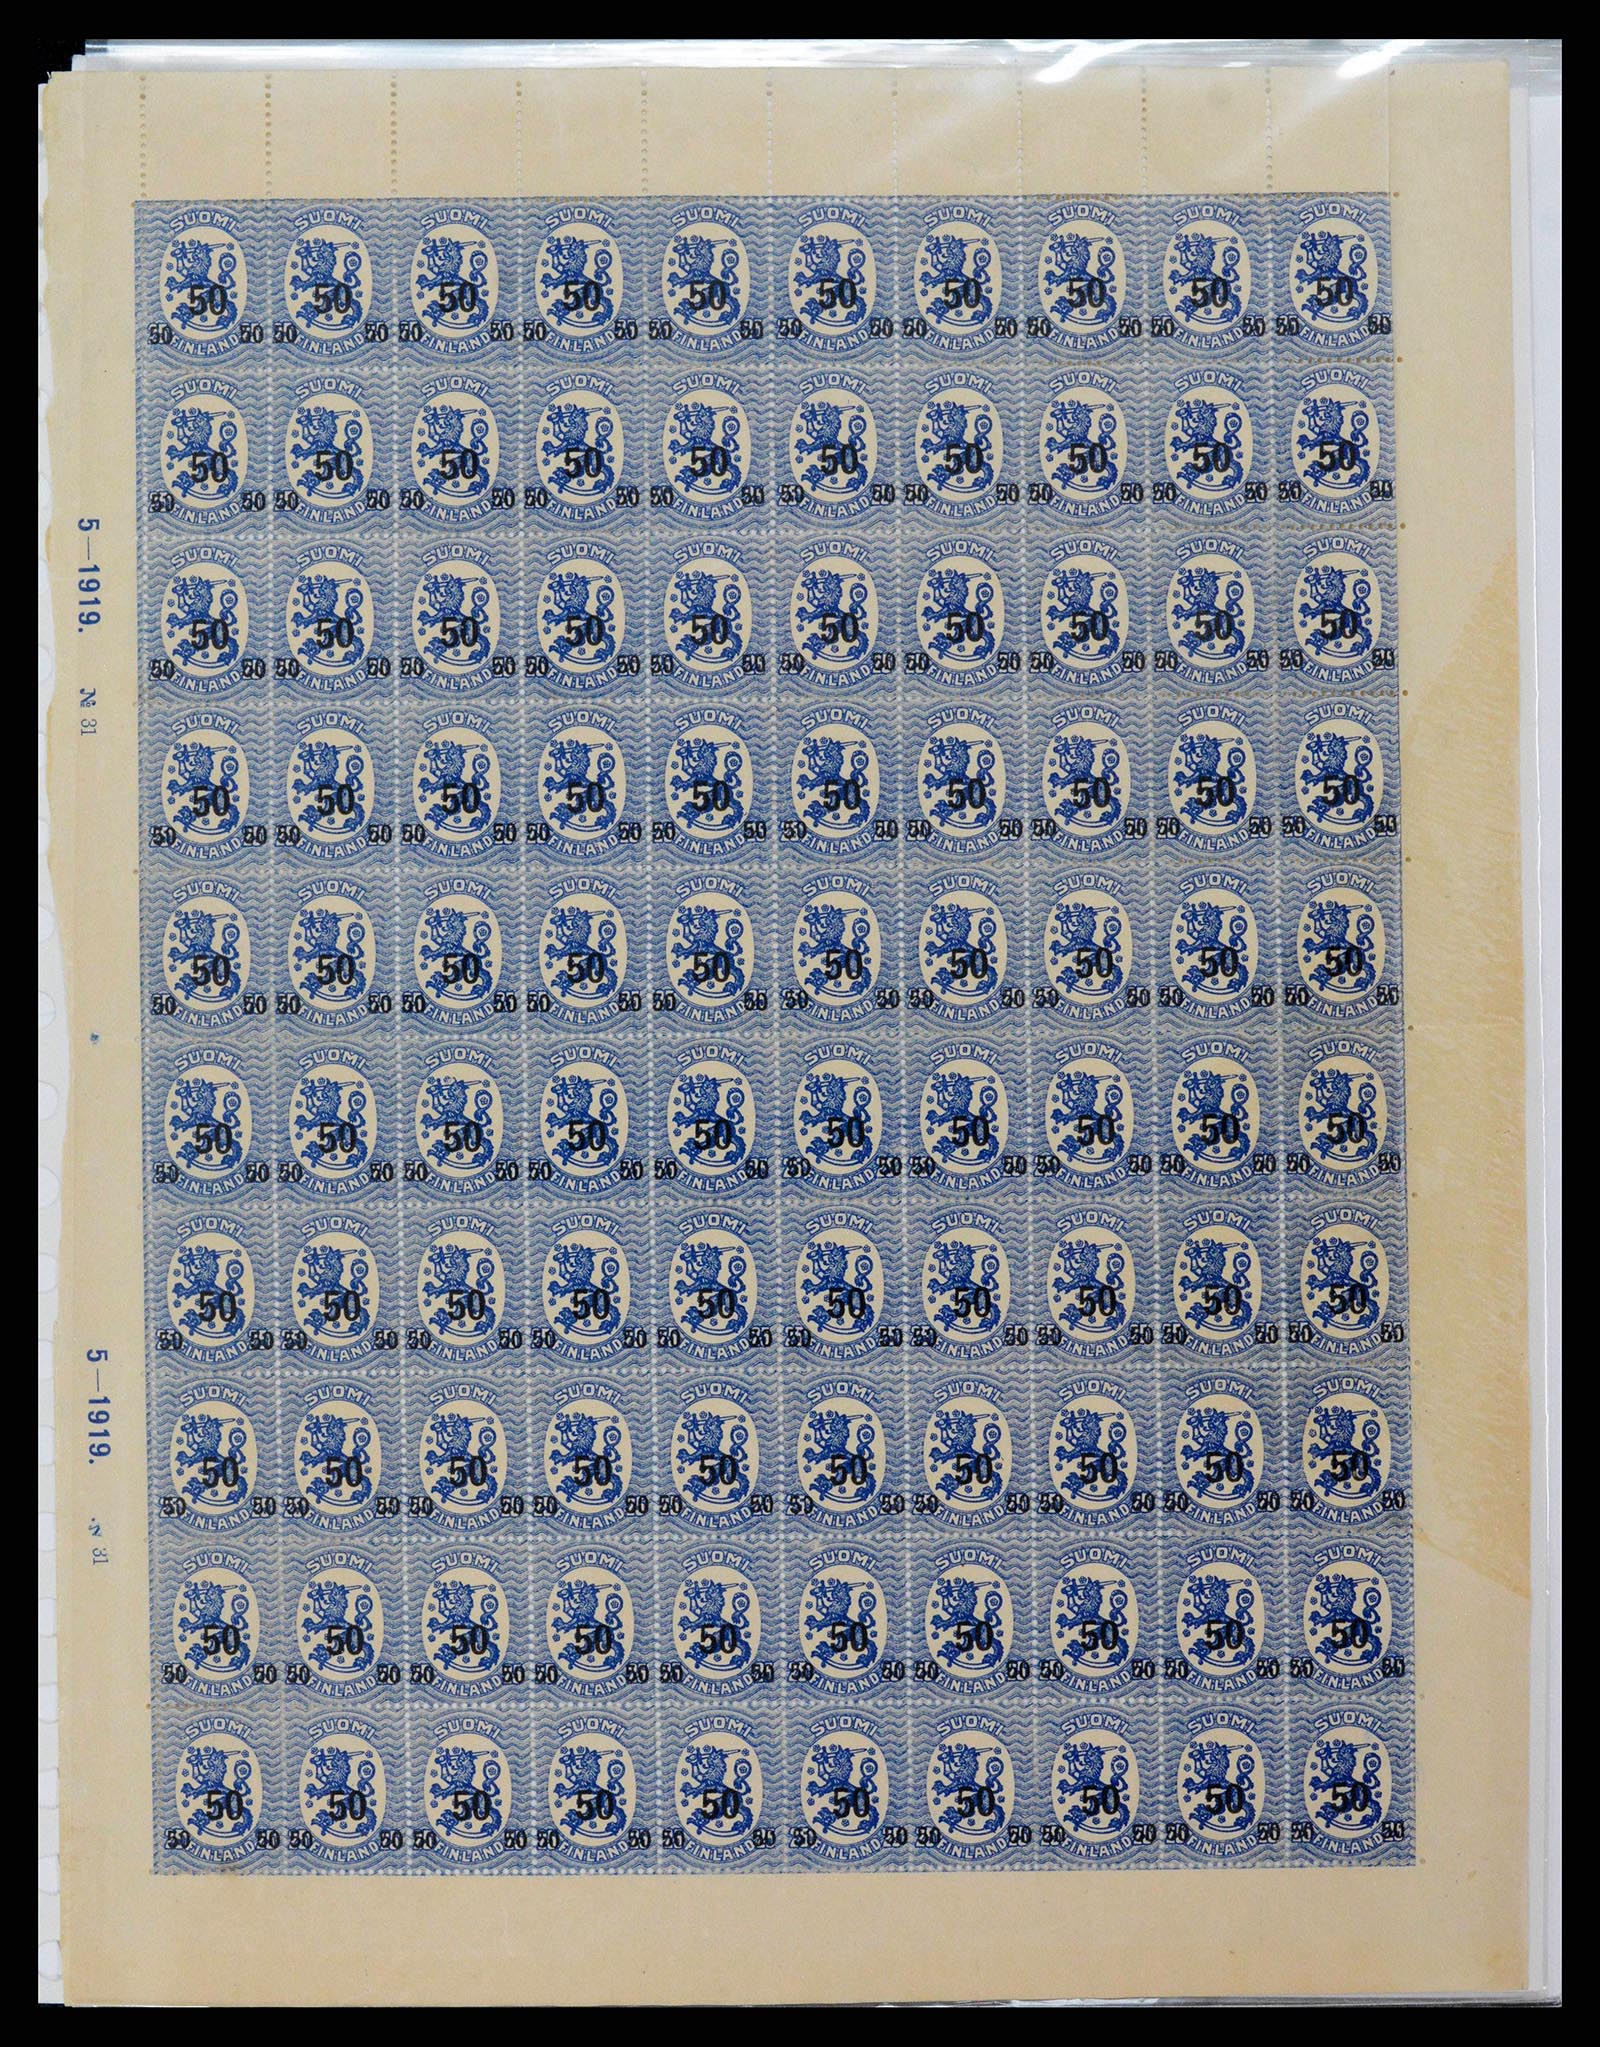 38252 0012 - Stamp collection 38252 Finland 1856-1956.